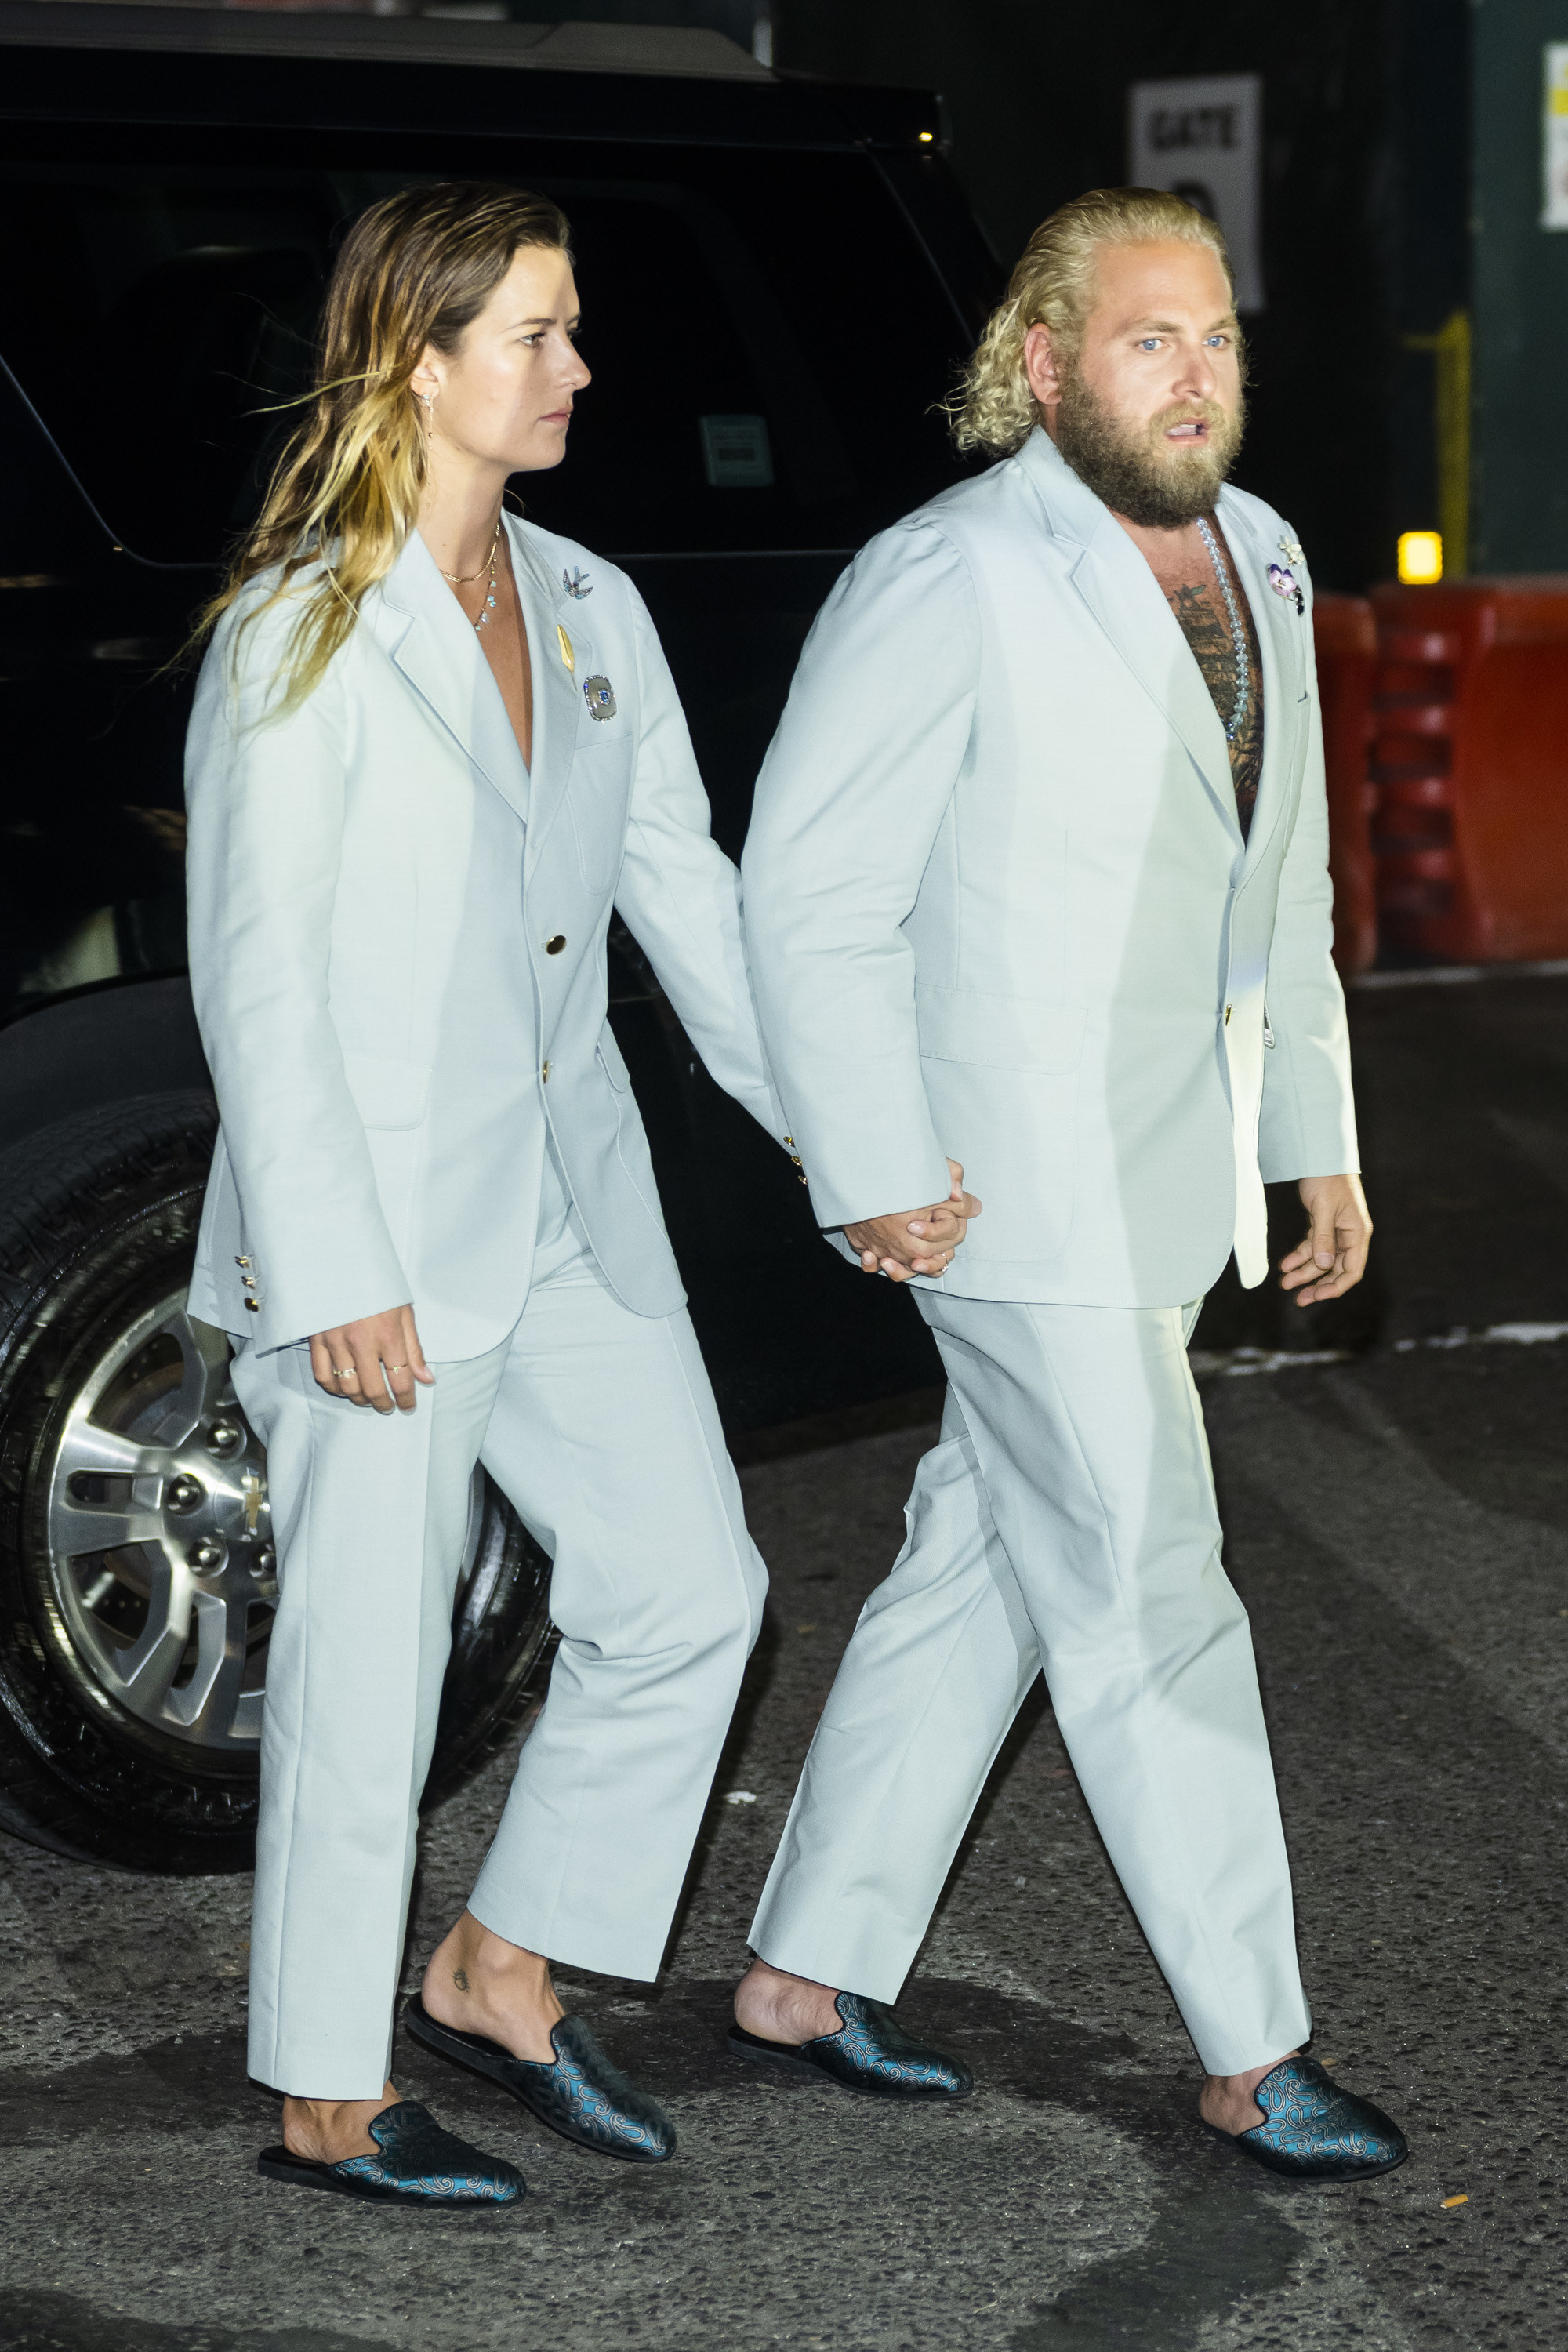 The couple walking hand-in-hand in their coordinated ensemble